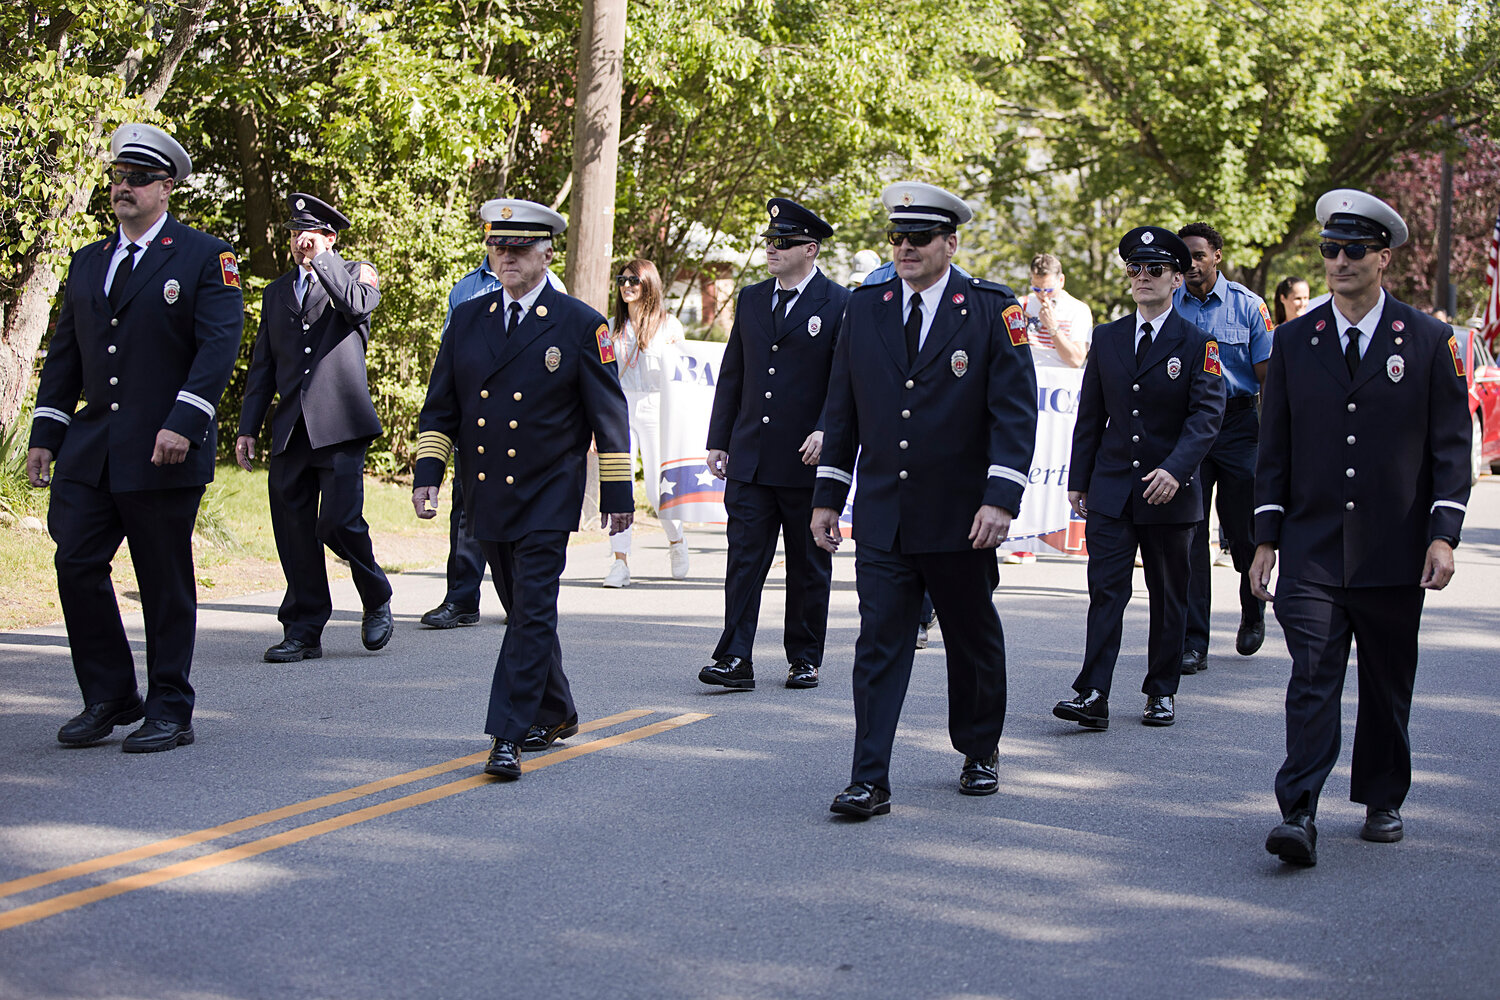 Barrington firefighters march along Upland Way during the town's Memorial Day parade, Monday.